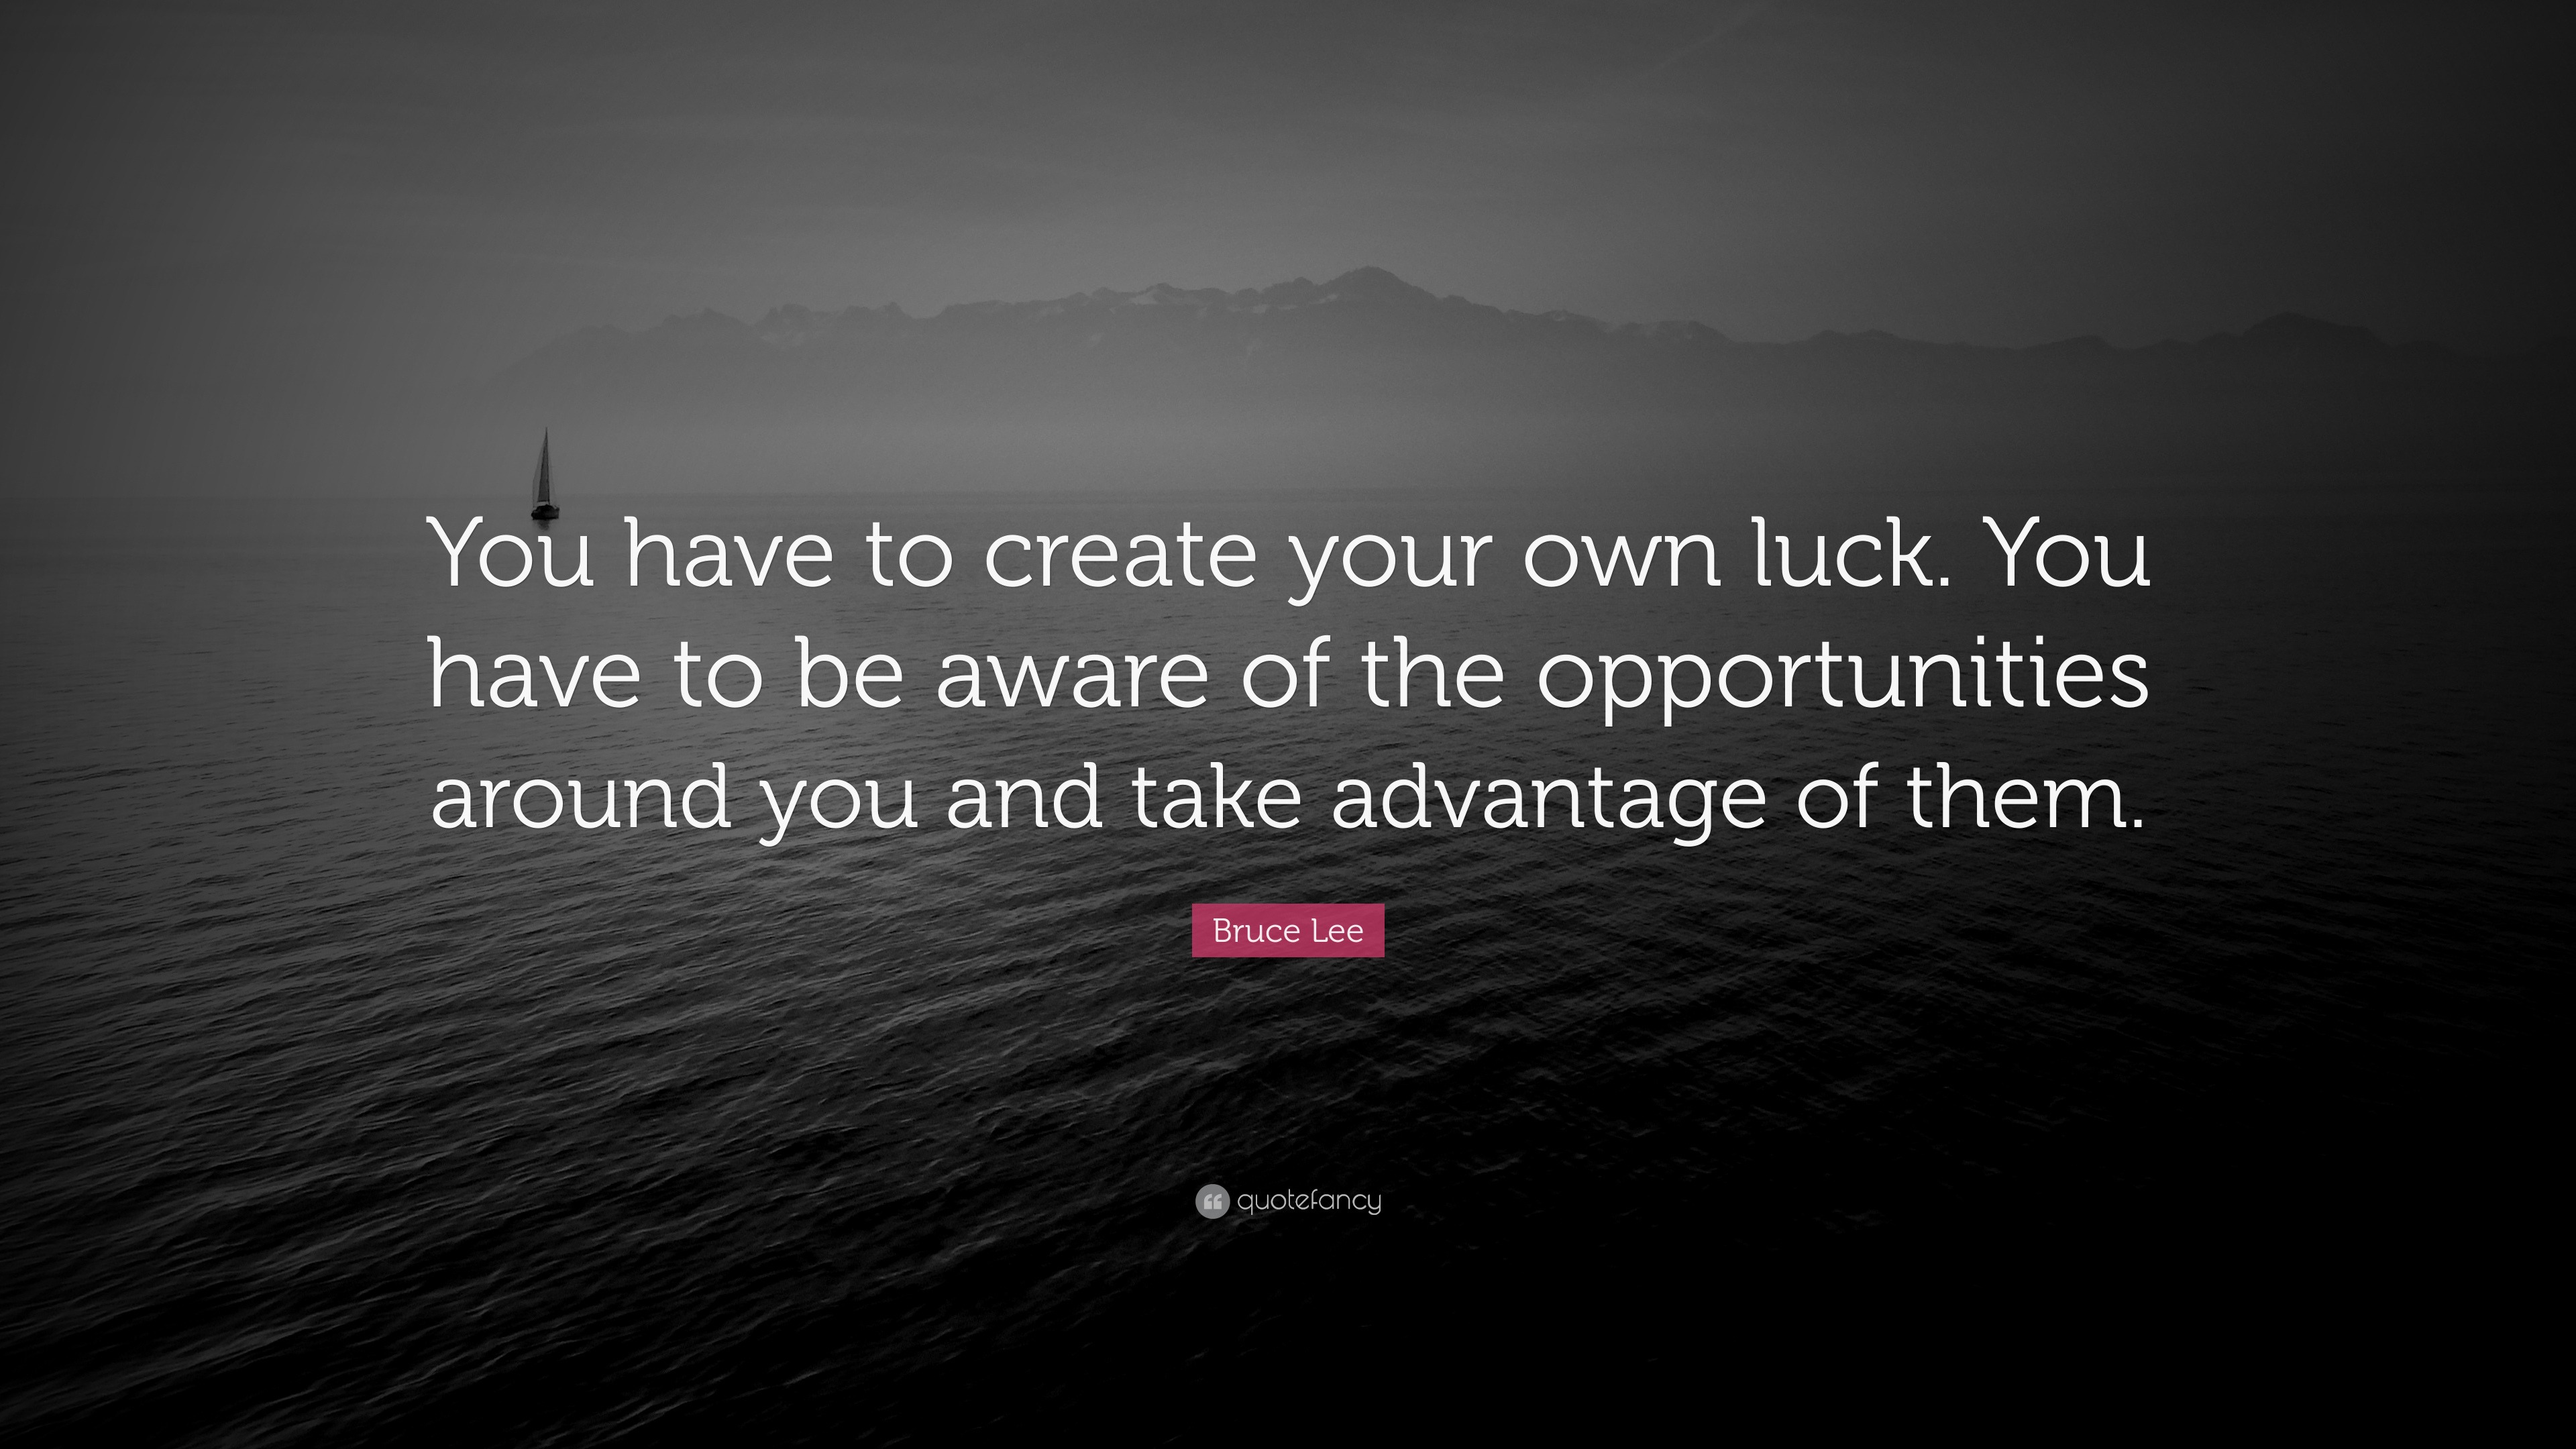 Bruce Lee Quote: "You have to create your own luck. You have to be aware of the opportunities ...